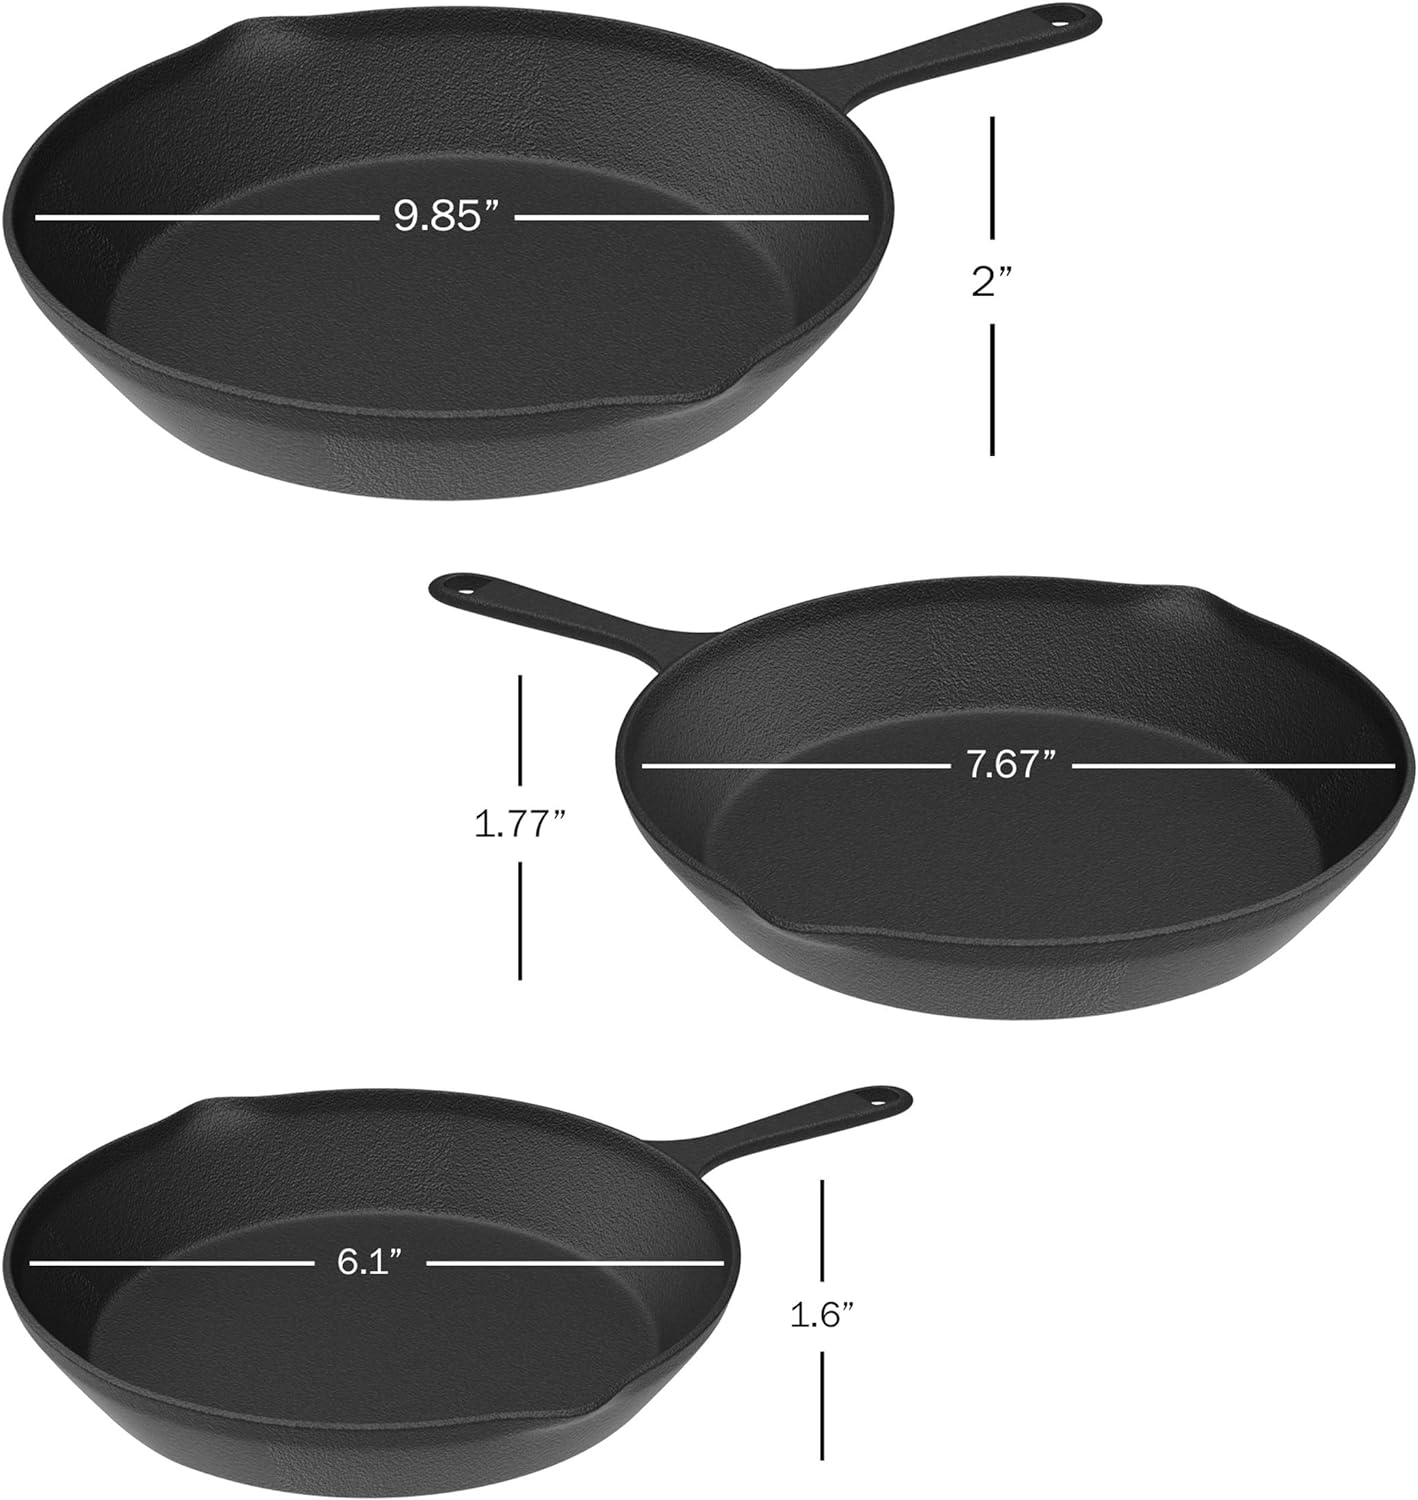 Pre Seasoned Cast Iron Skillets - 3 Pan Set - 9 inches, 8 inches, 6 inches - 1.5 to 2 inches deep - Durable with Strong Handle - Great for both veggies and meat - image 2 of 7